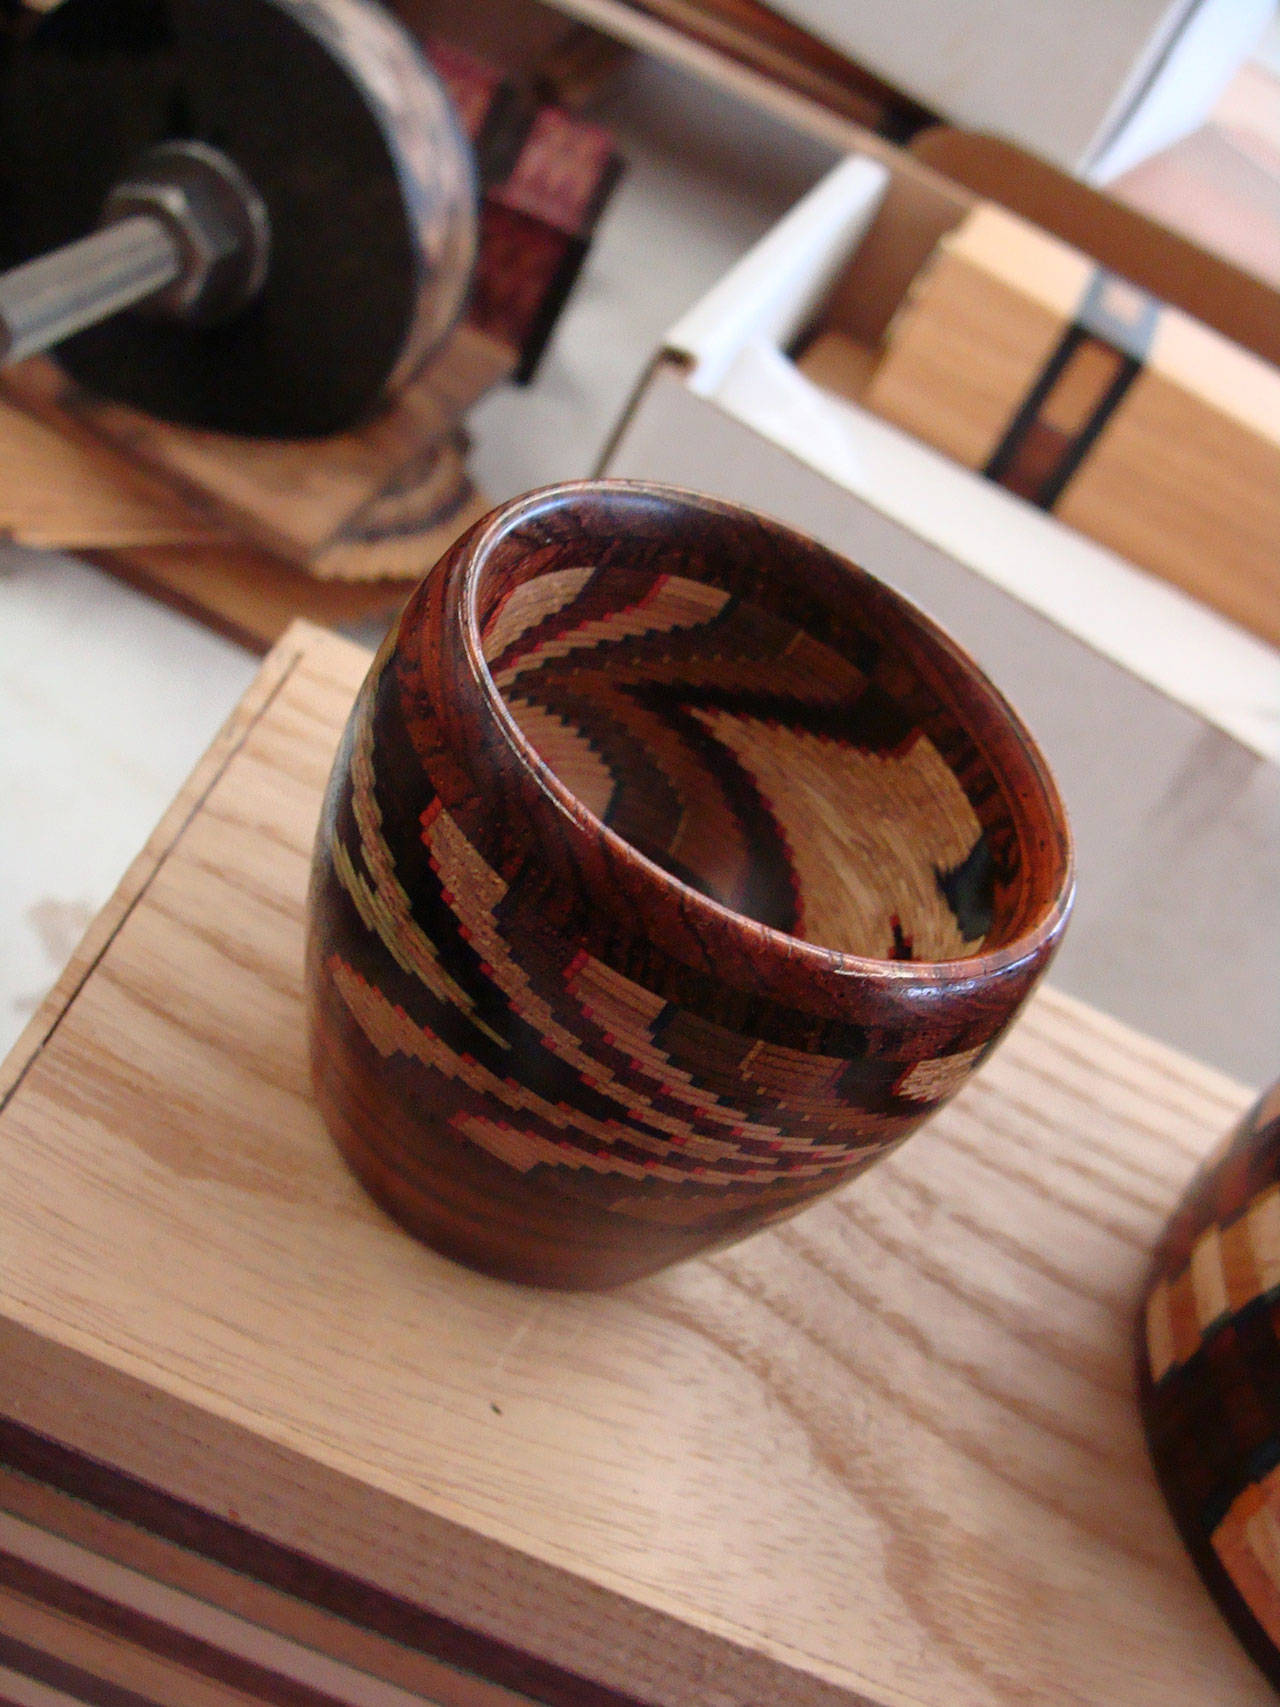 Bowls and bracelets by Martha Collins can consist of up to 1,200 pieces of wood. Photo by Turningsmith Studios